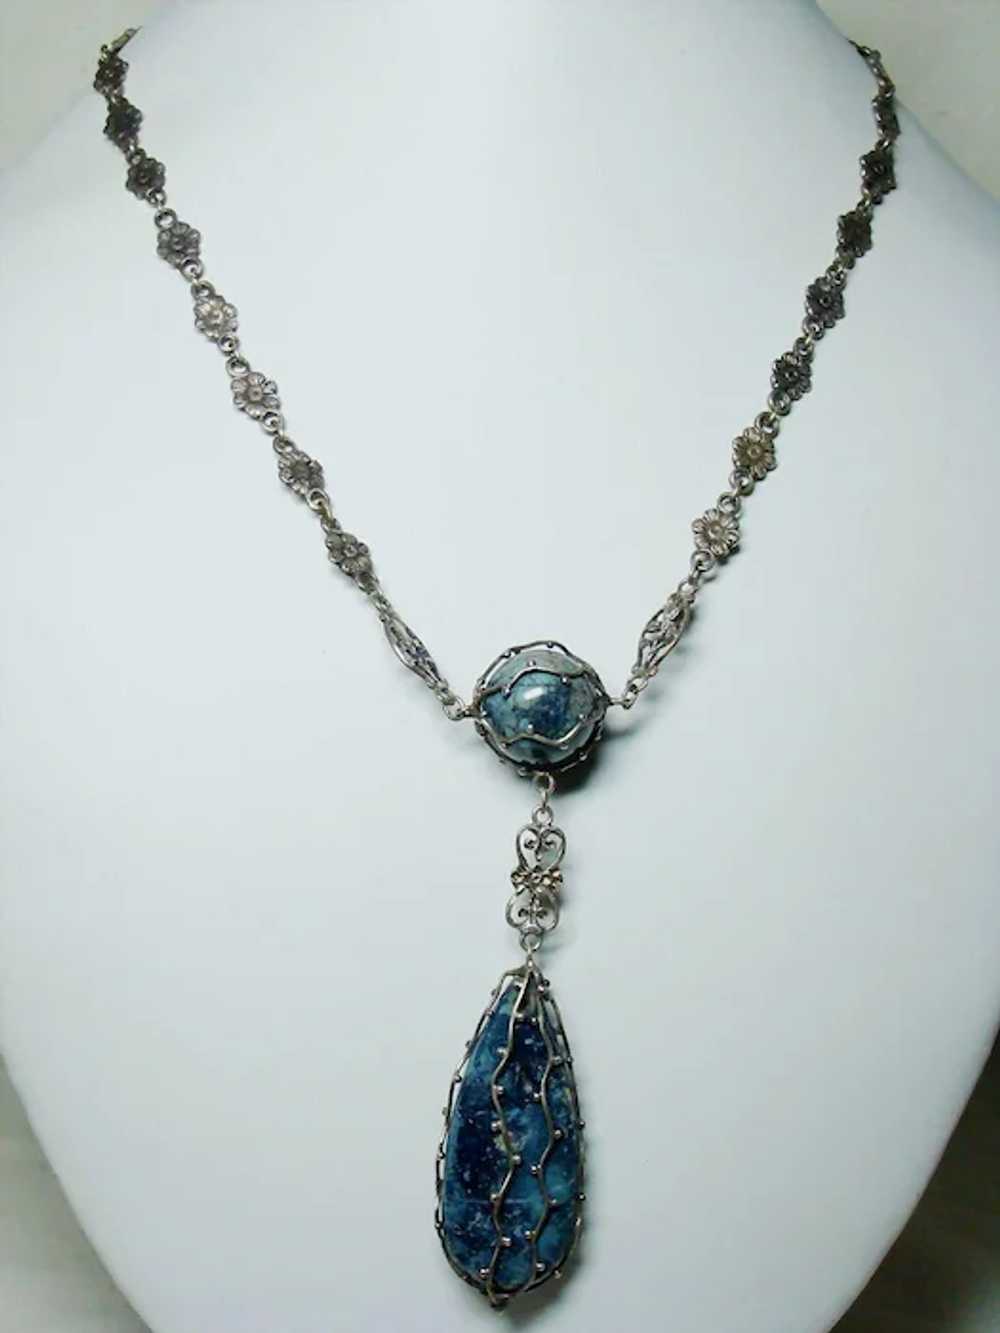 Vintage Arts and Crafts Sodalite Necklace - image 3